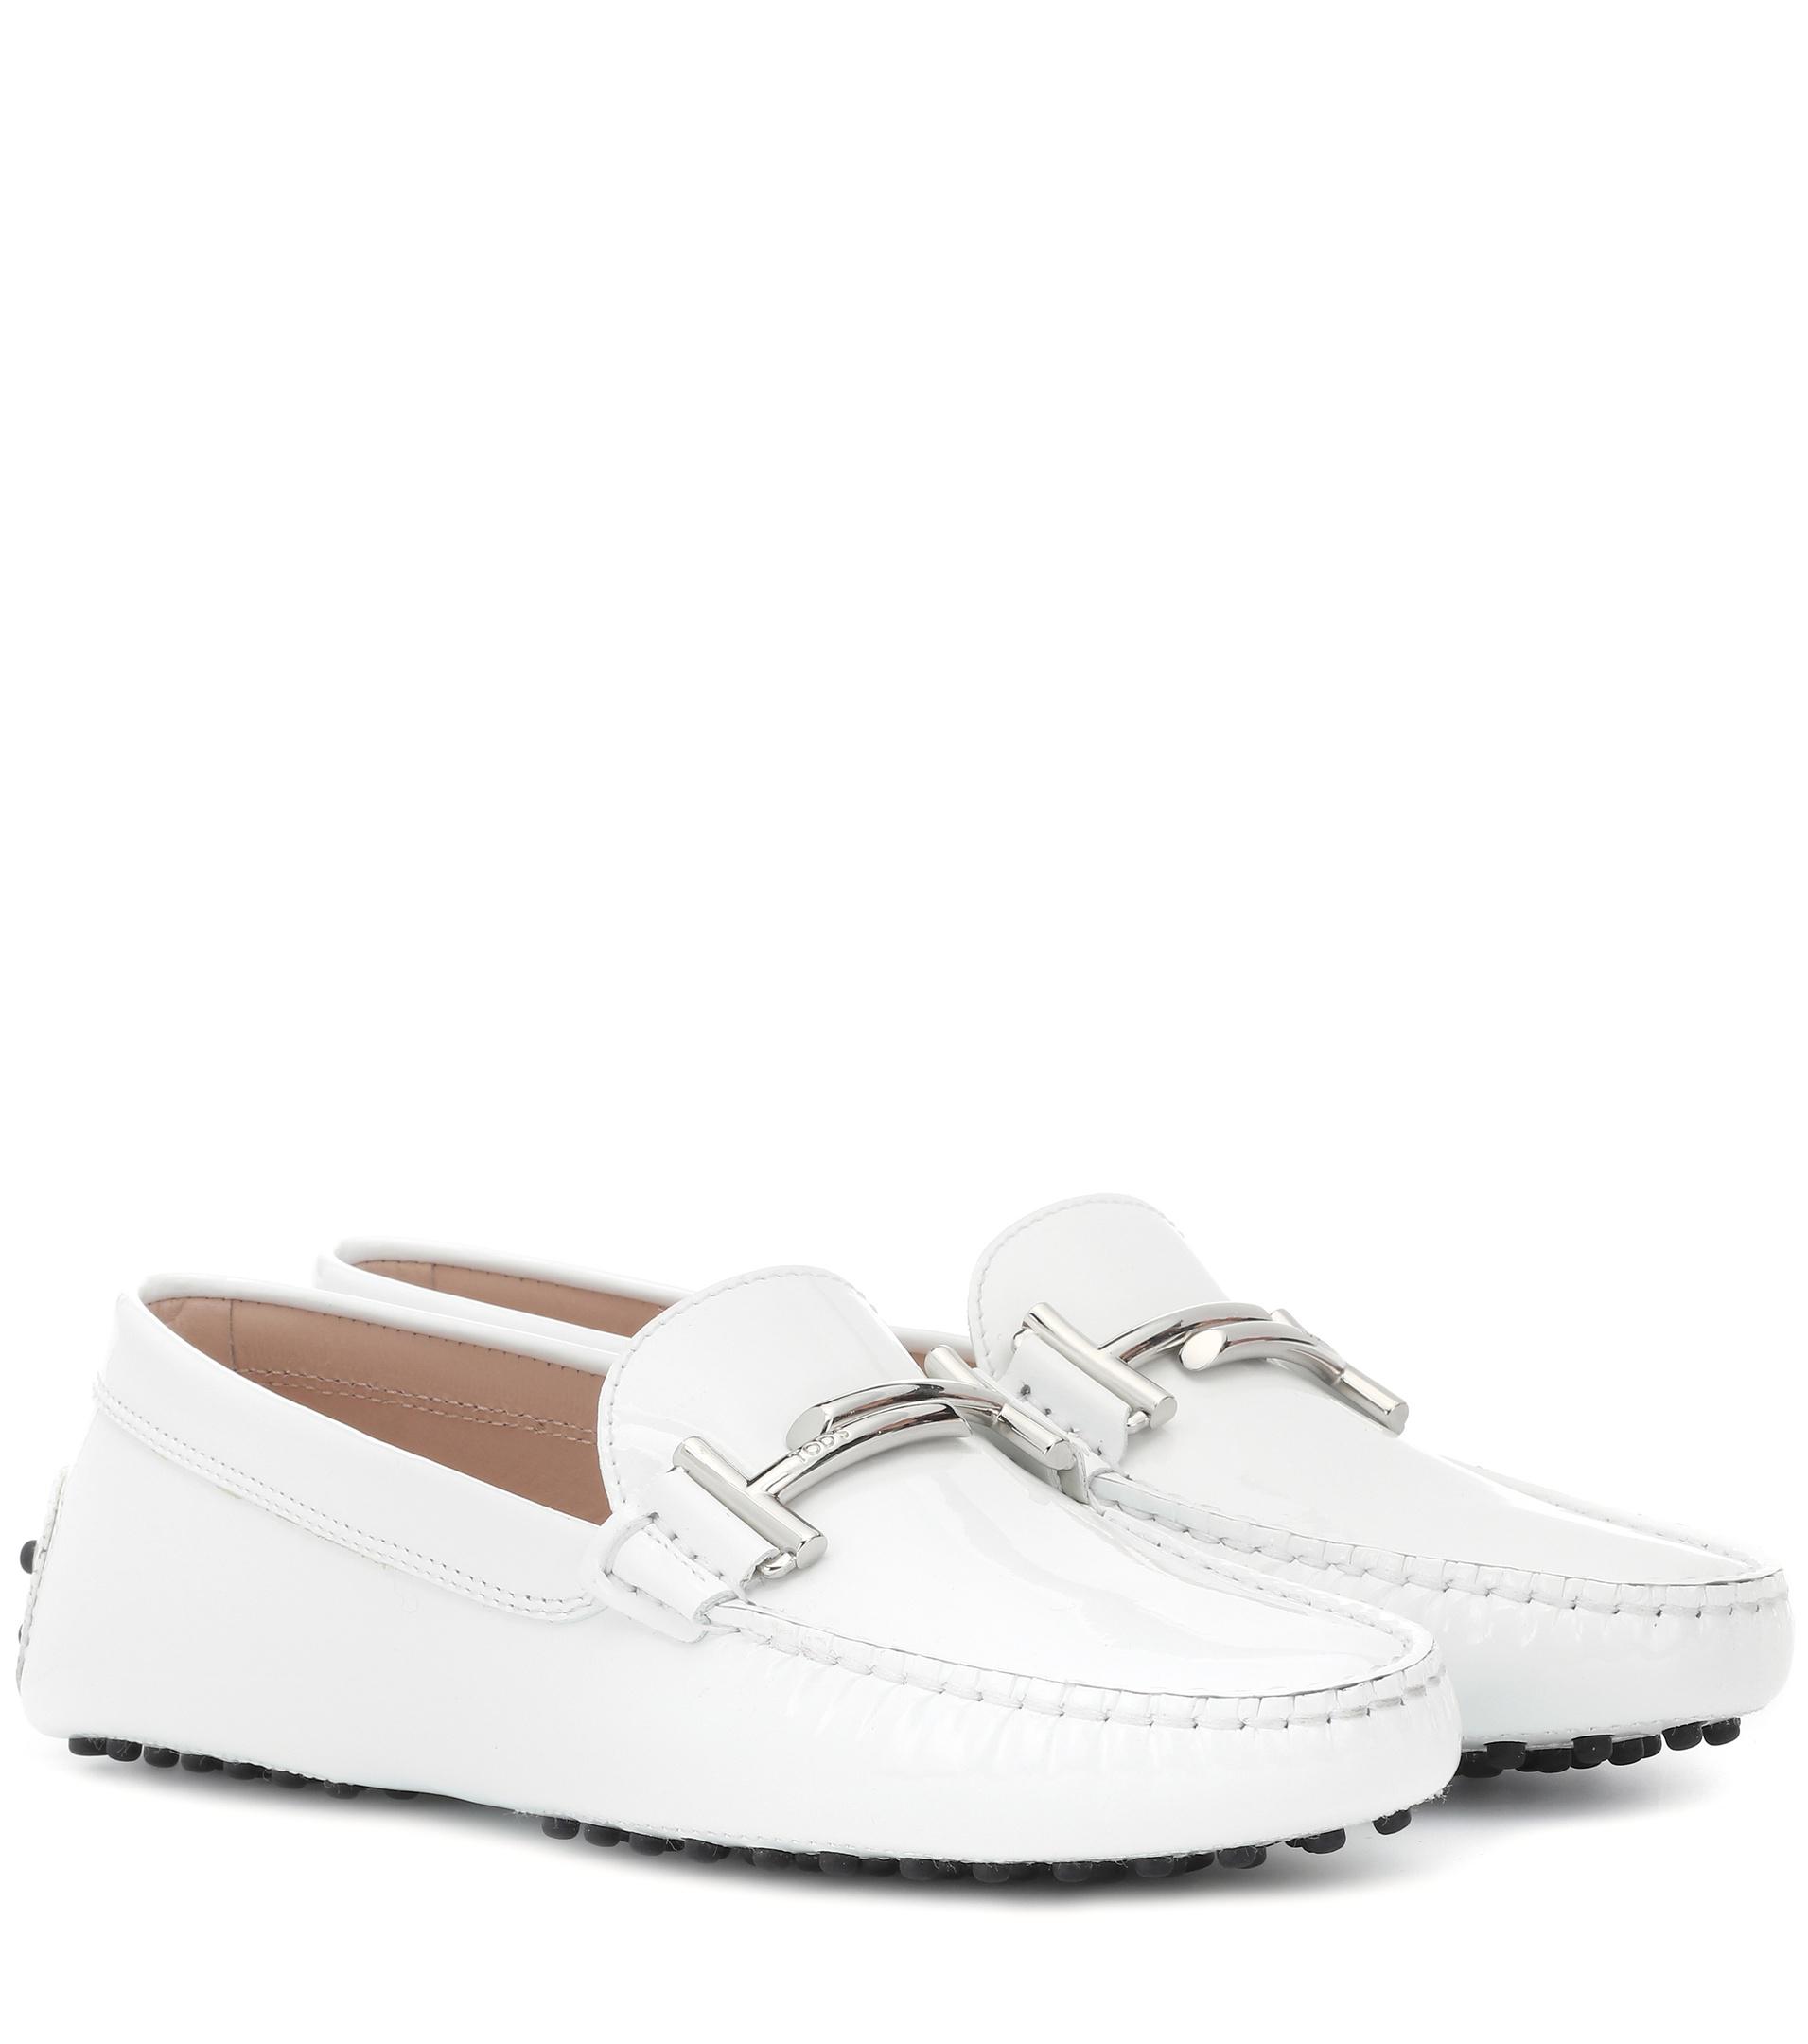 Tod's Gommino Patent Leather Loafers in White - Save 10% - Lyst